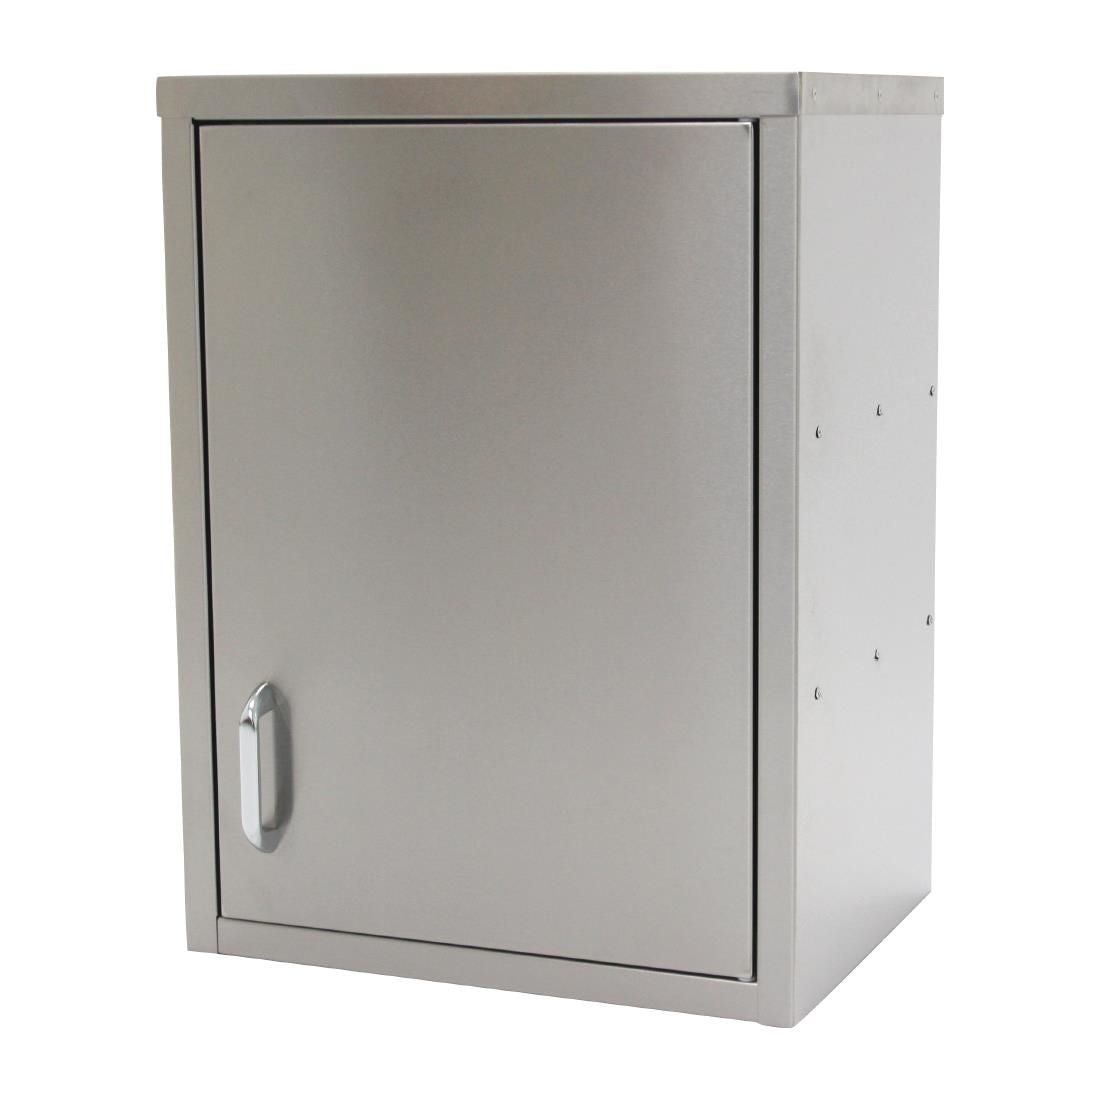 GM769 Parry Stainless Steel Hinged Wall Cupboard 600mm JD Catering Equipment Solutions Ltd